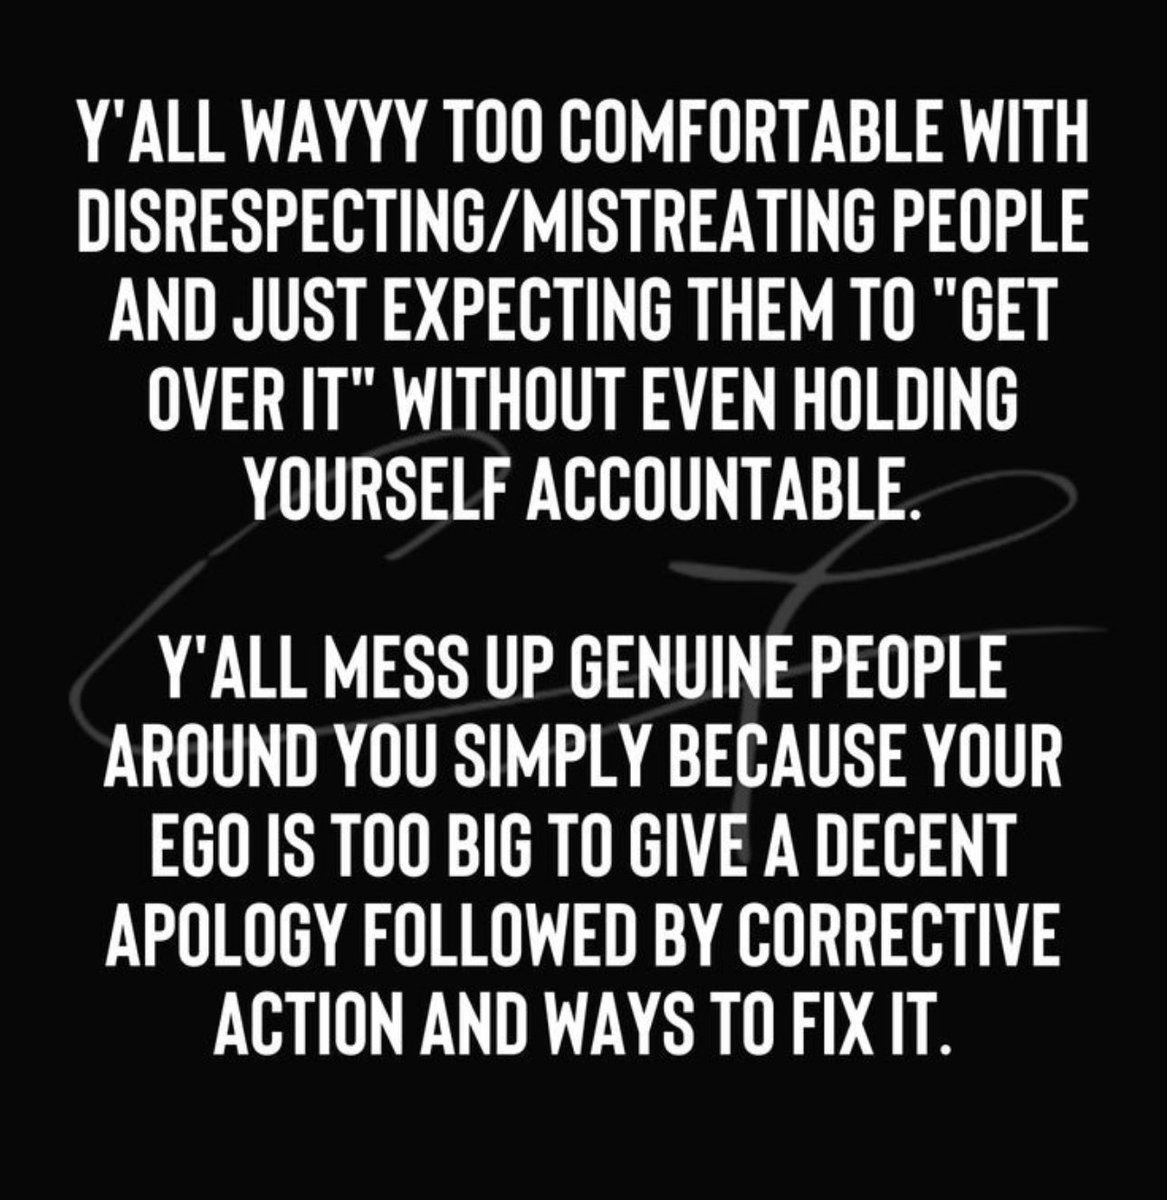 I can’t stand a disrespectful MF and think it’s okay to treat people like shit i’m over it no more said or thoughts i will move in silence for here on🤷🏾‍♀️🤷🏾‍♀️🤷🏾‍♀️